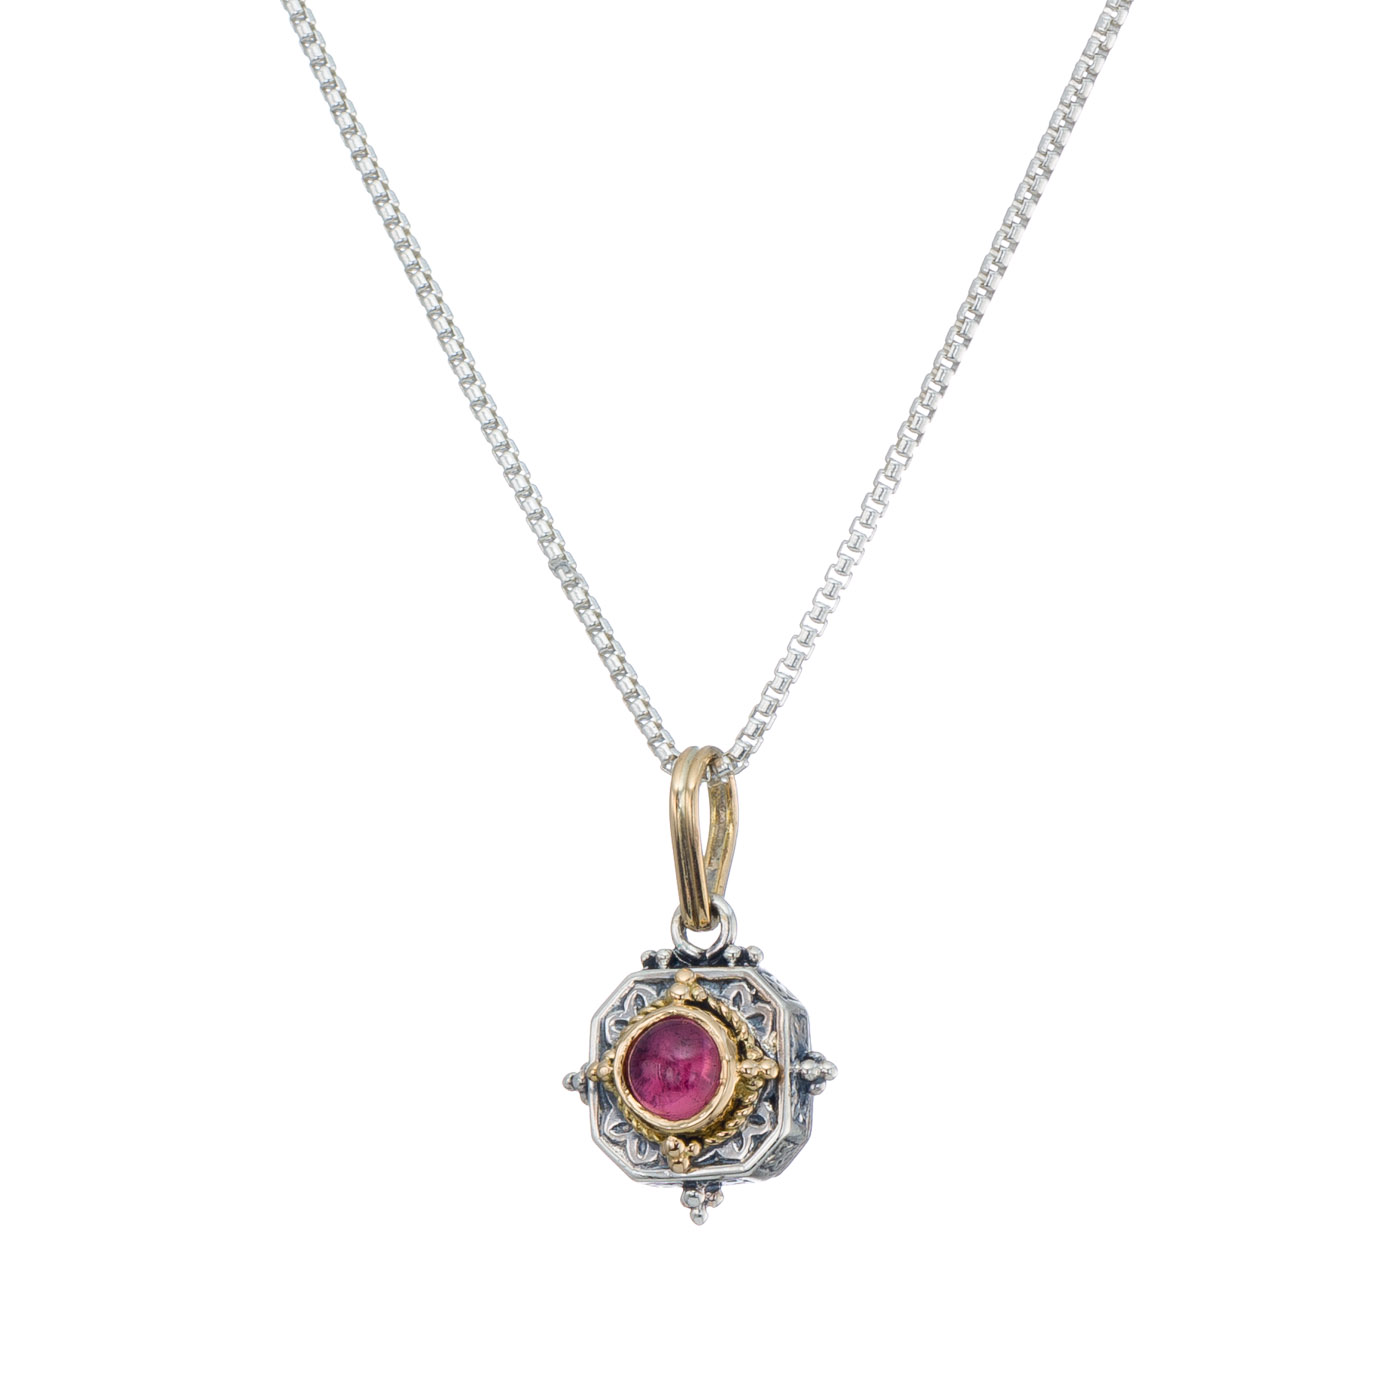 Cyclades square pendant in 18K Gold and Sterling silver